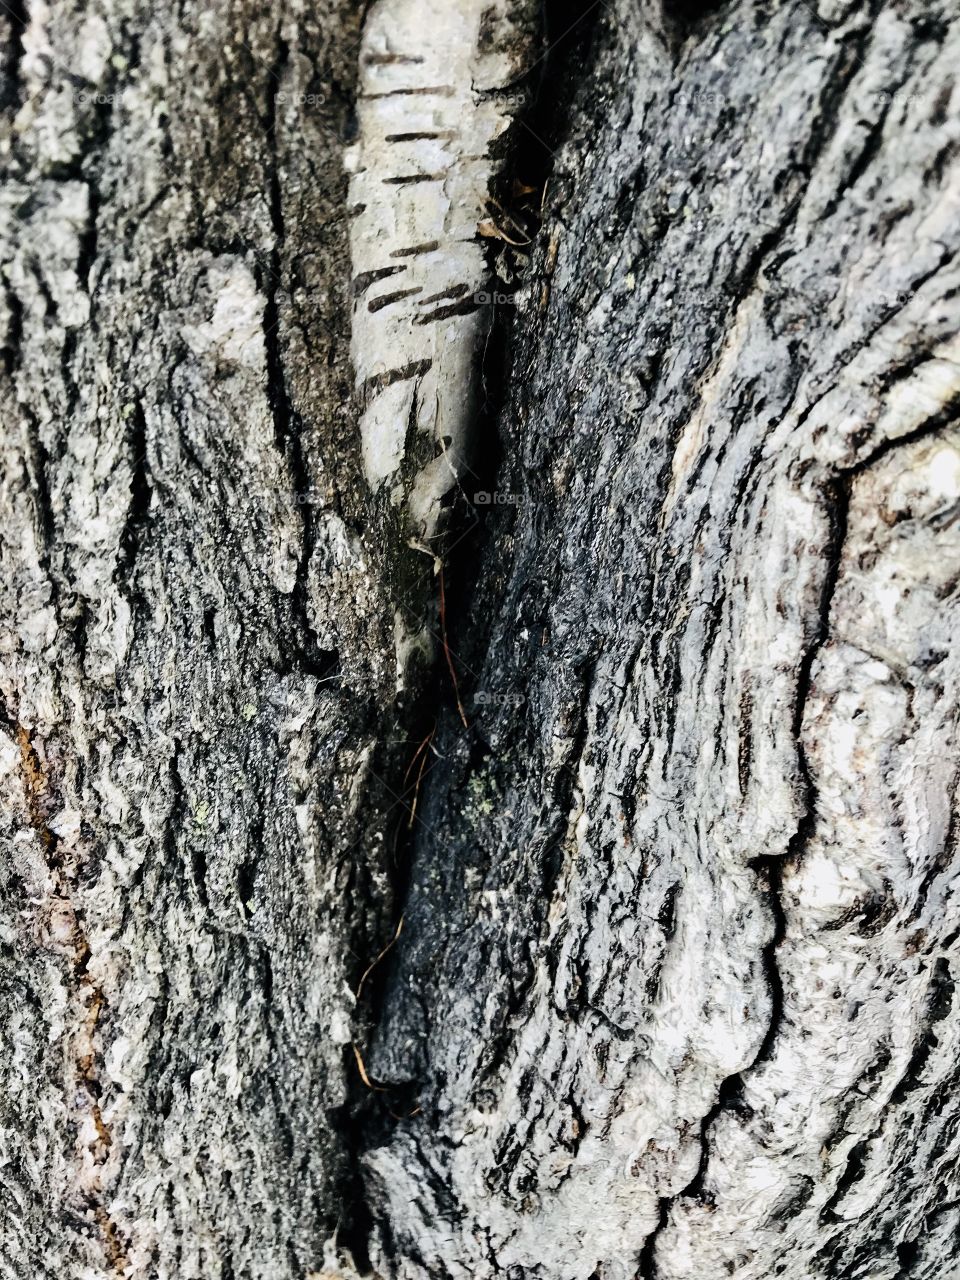 Surface of the wood